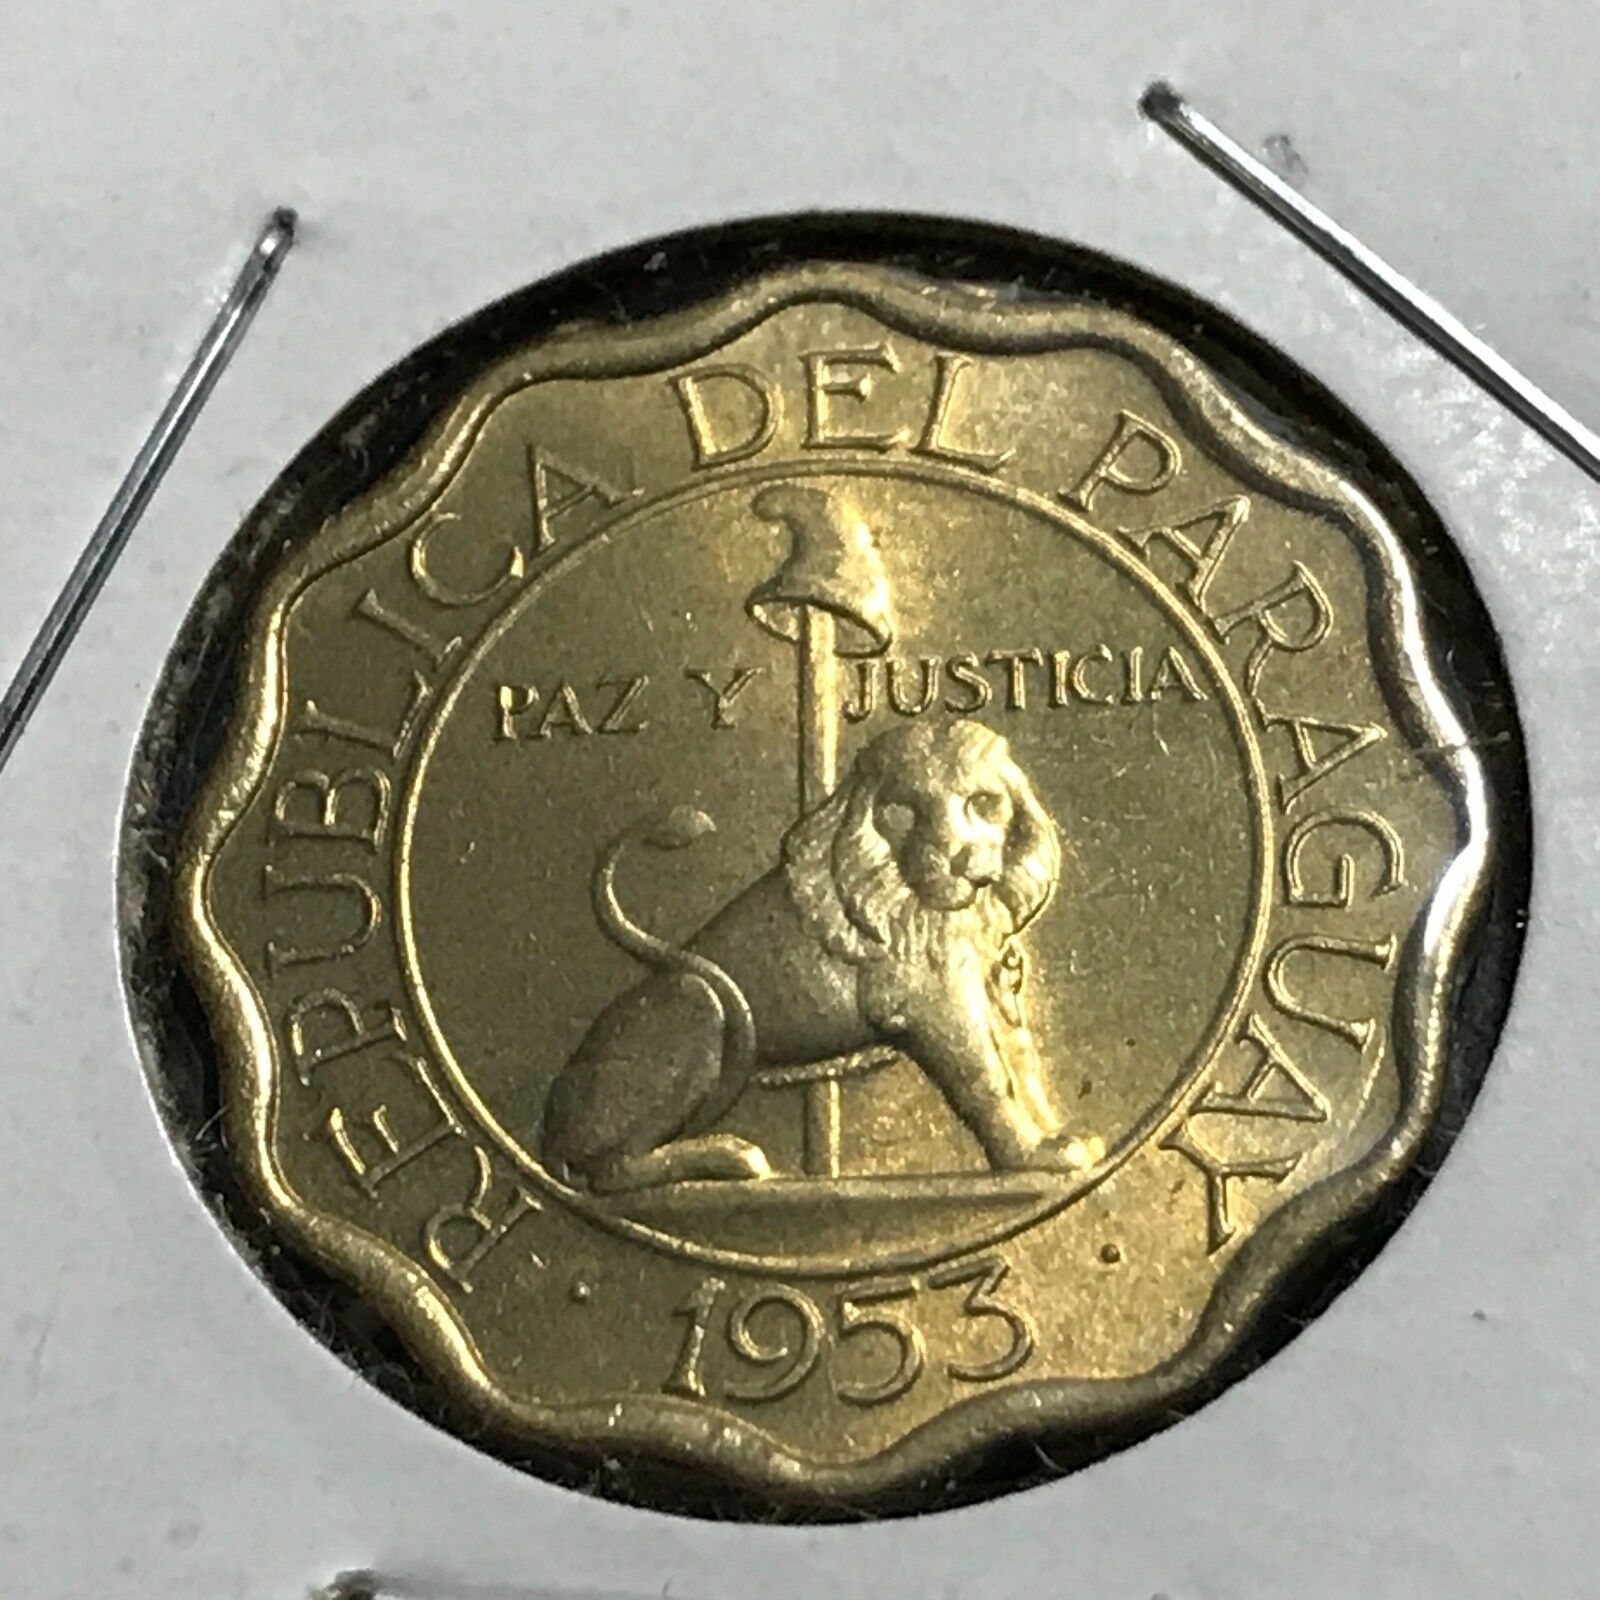 1953 Paraguay 15 Centimos Brilliant Uncirculated Coin